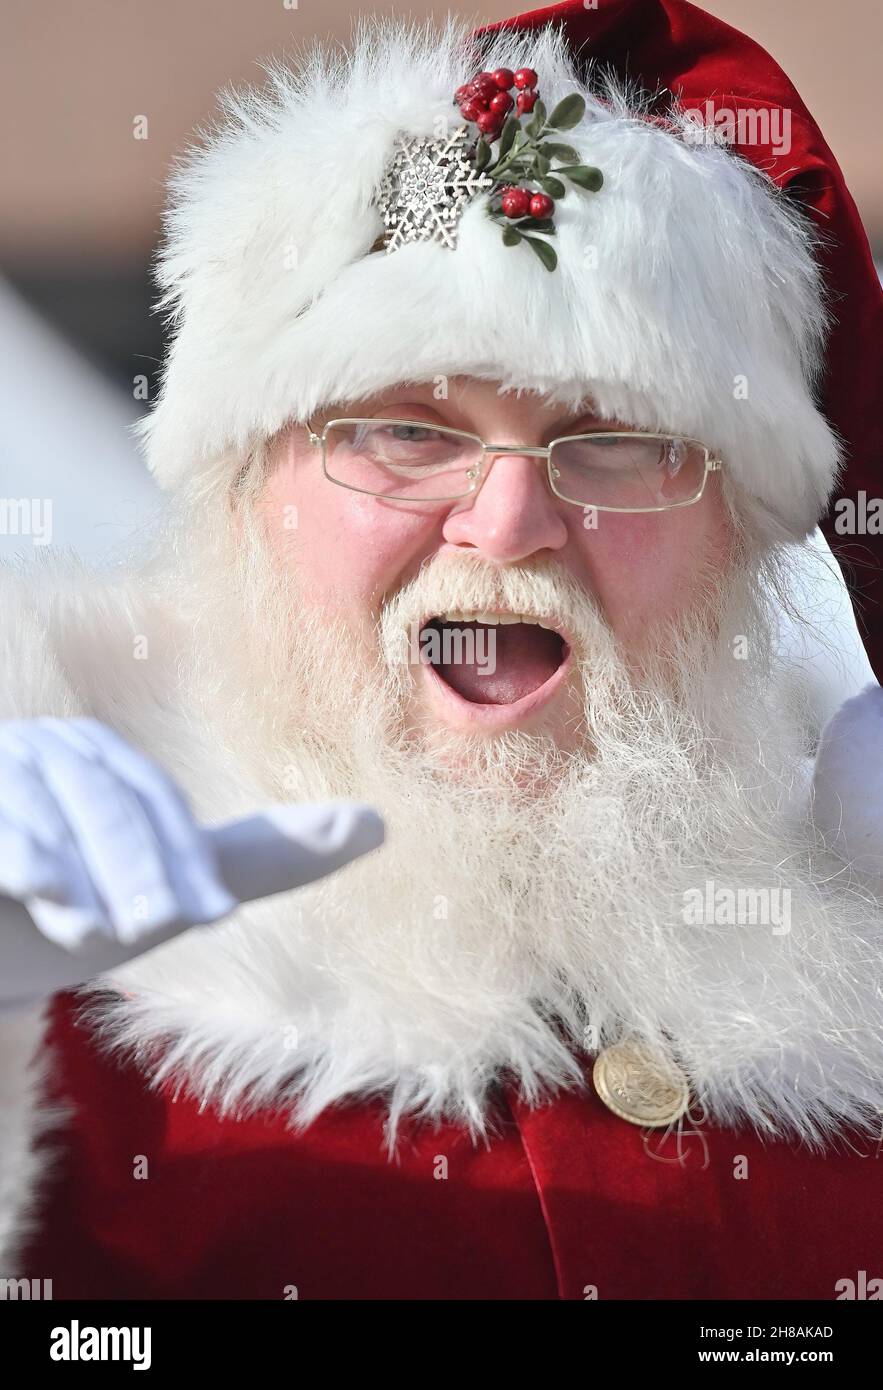 Wilkes Barre, United States. 27th Nov, 2021. A man portraying Santa Claus waves to children during a holiday market. A man portrays Santa Claus at a holiday marketplace and interacts with children as the kick off of the Christmas season on Small Business Saturday. (Photo by Aimee Dilger/SOPA Images/Sipa USA) Credit: Sipa USA/Alamy Live News Stock Photo